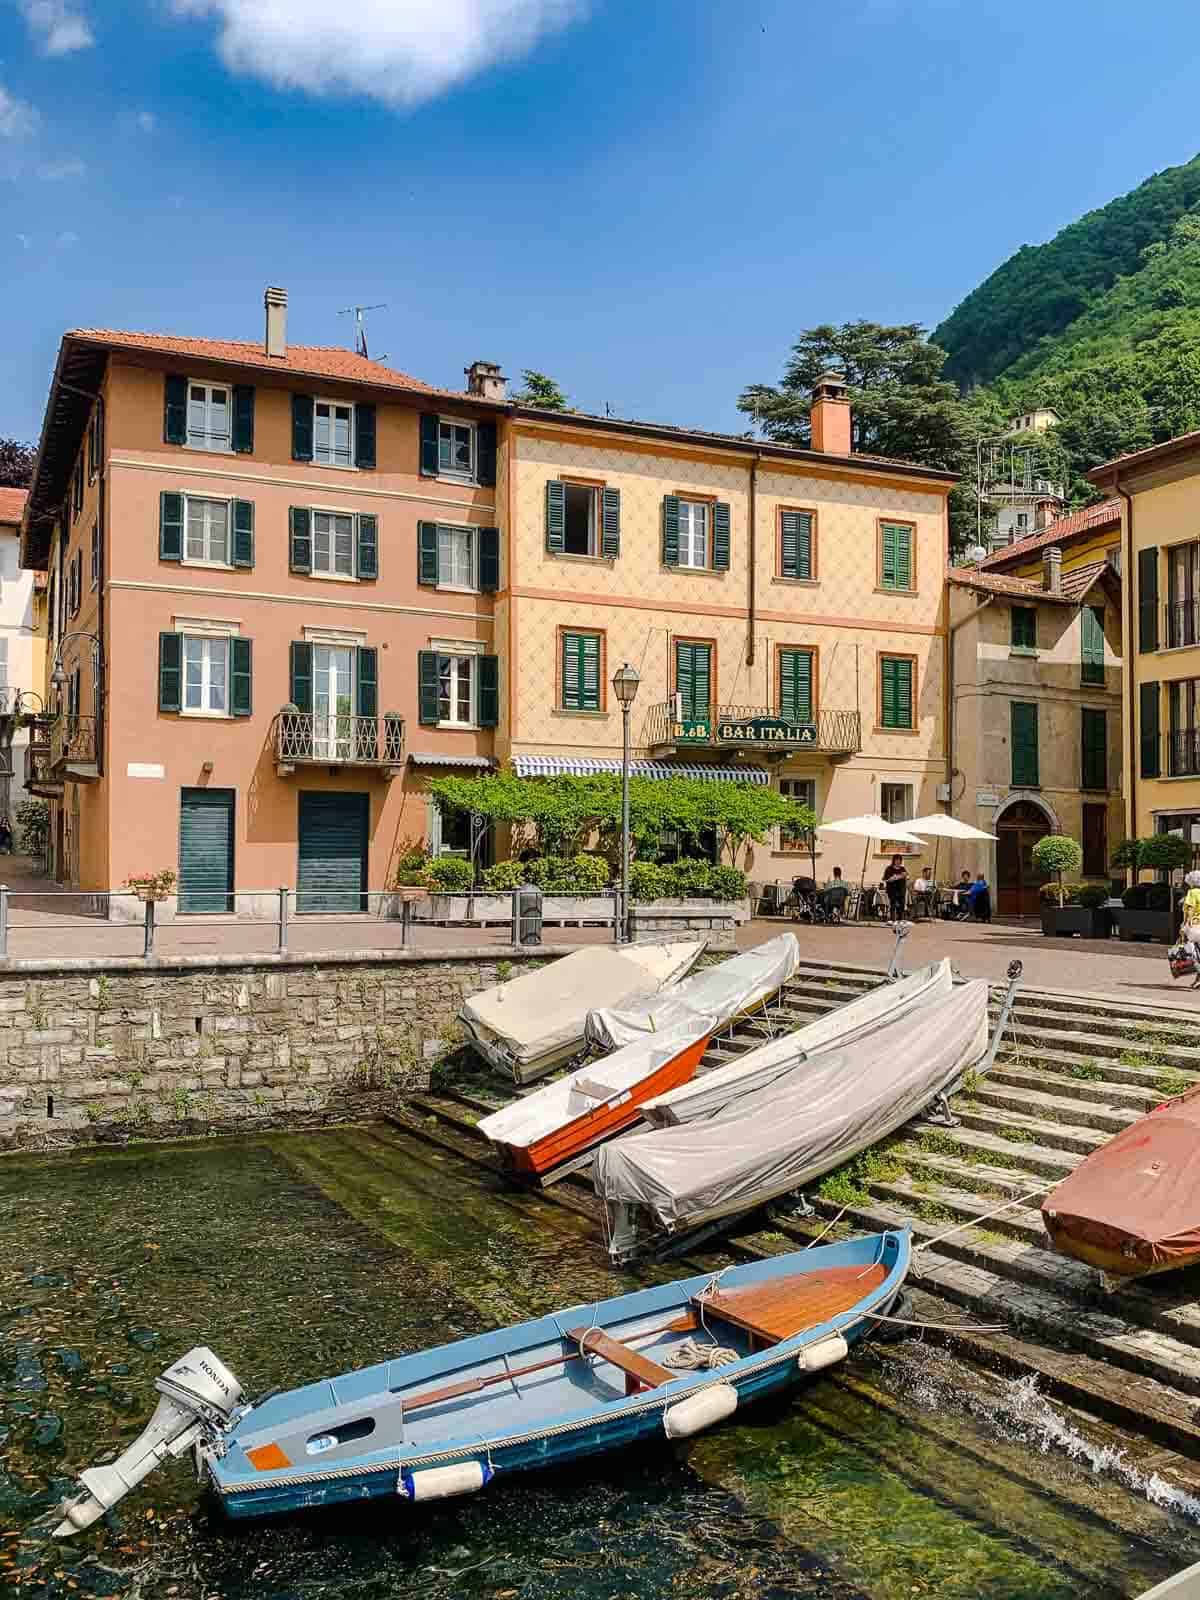 Boats in front of Ferry station in Torno, Lake Como.